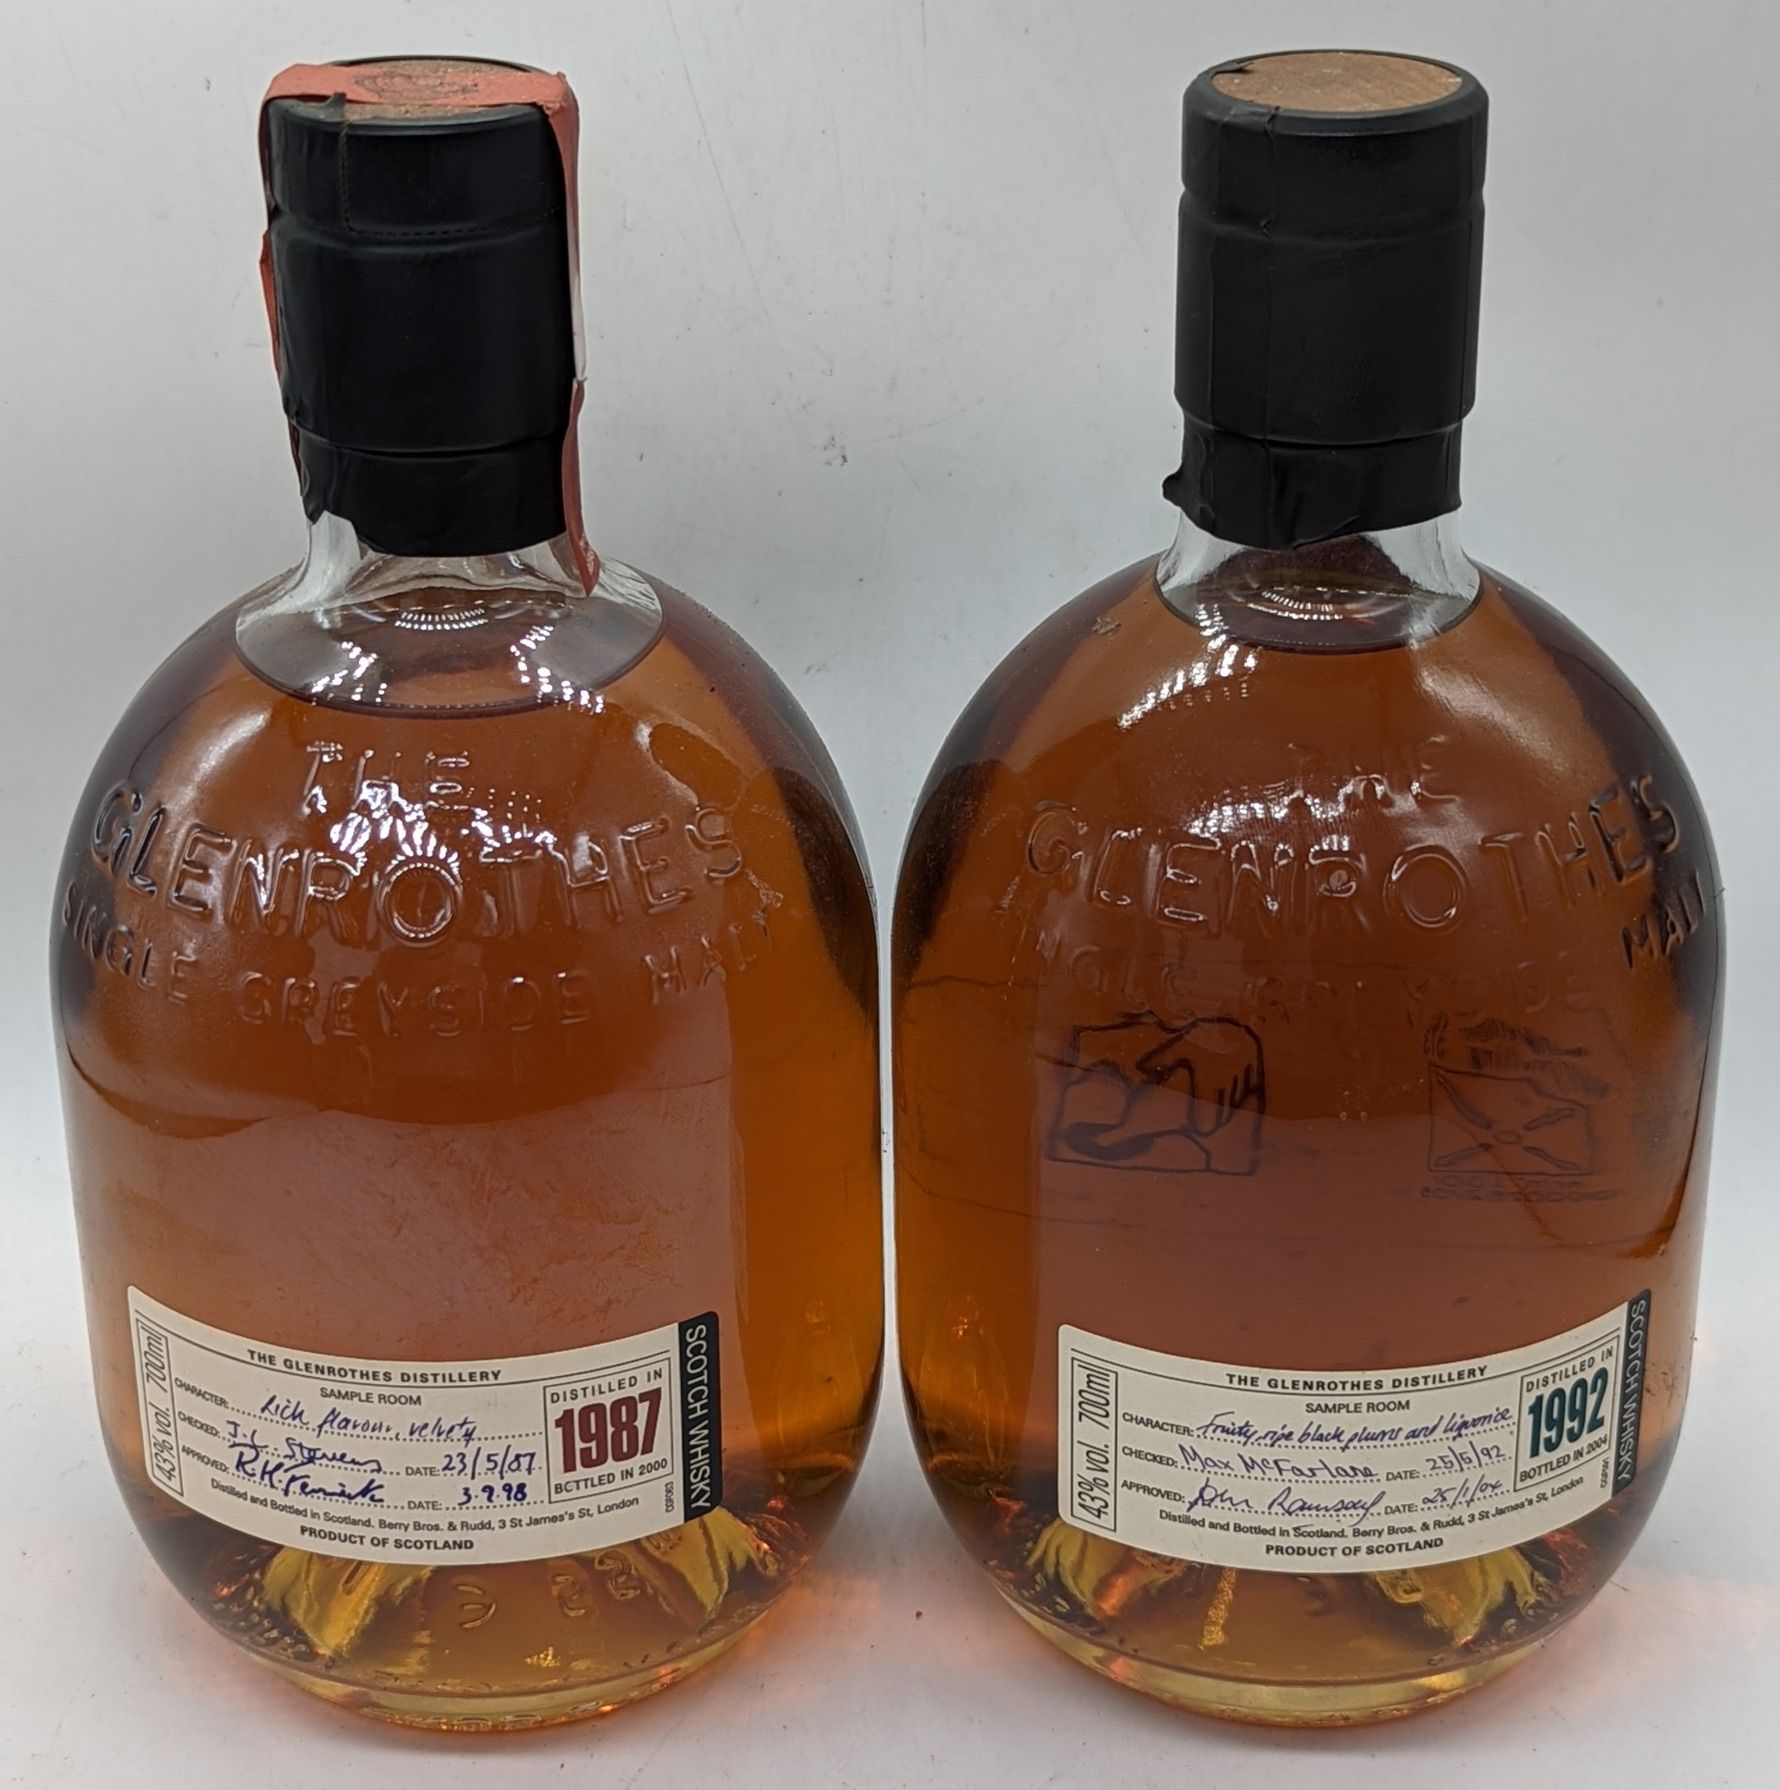 Glenrothes Une bouteille de whisky Glenrothes 1987 et une bouteille de whisky Gl&hellip;